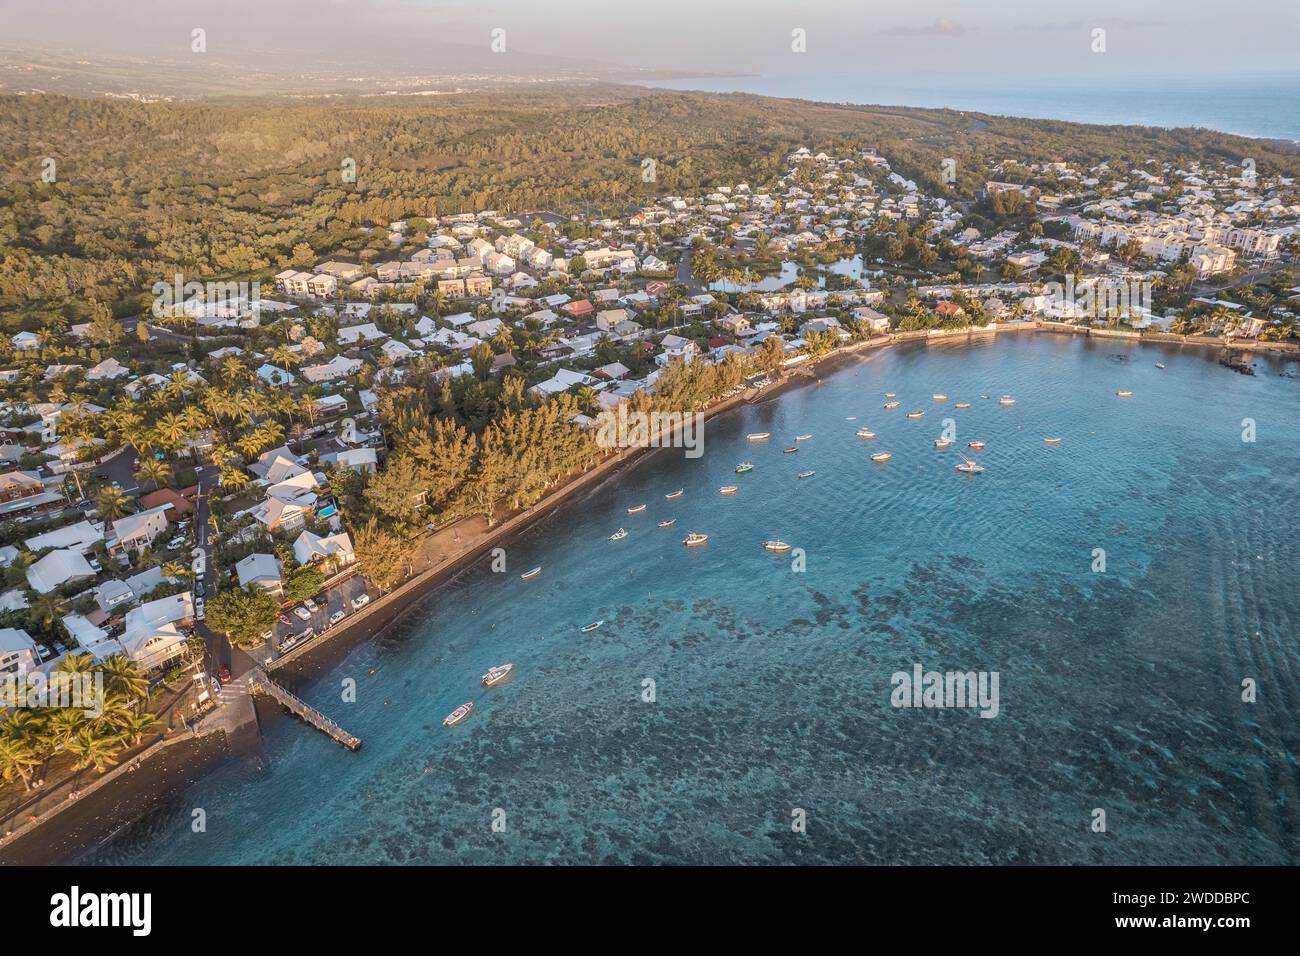 An aerial and scenic view of the Bassin Pirogue, on the beach at Etang-Salé, Reunion Island. Many boats are visible, as well as a tropical lagoon. Stock Photo